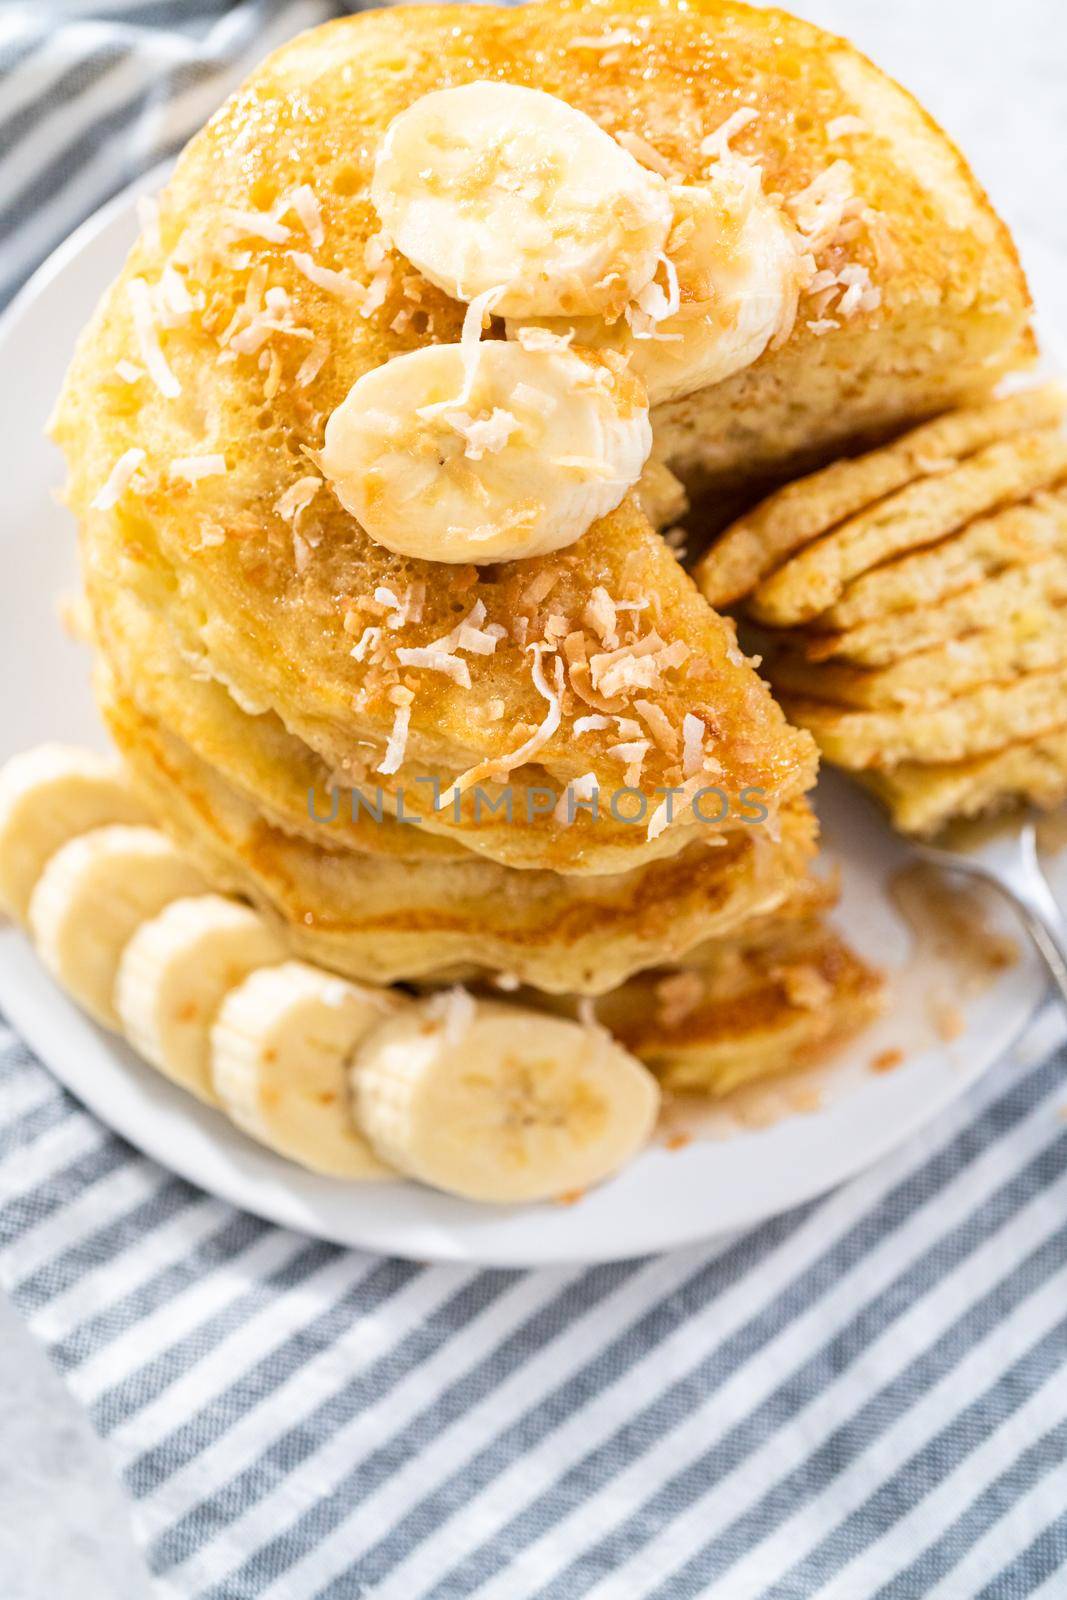 Eating freshly baked coconut banana pancakes garnished with sliced bananas and toasted coconut.